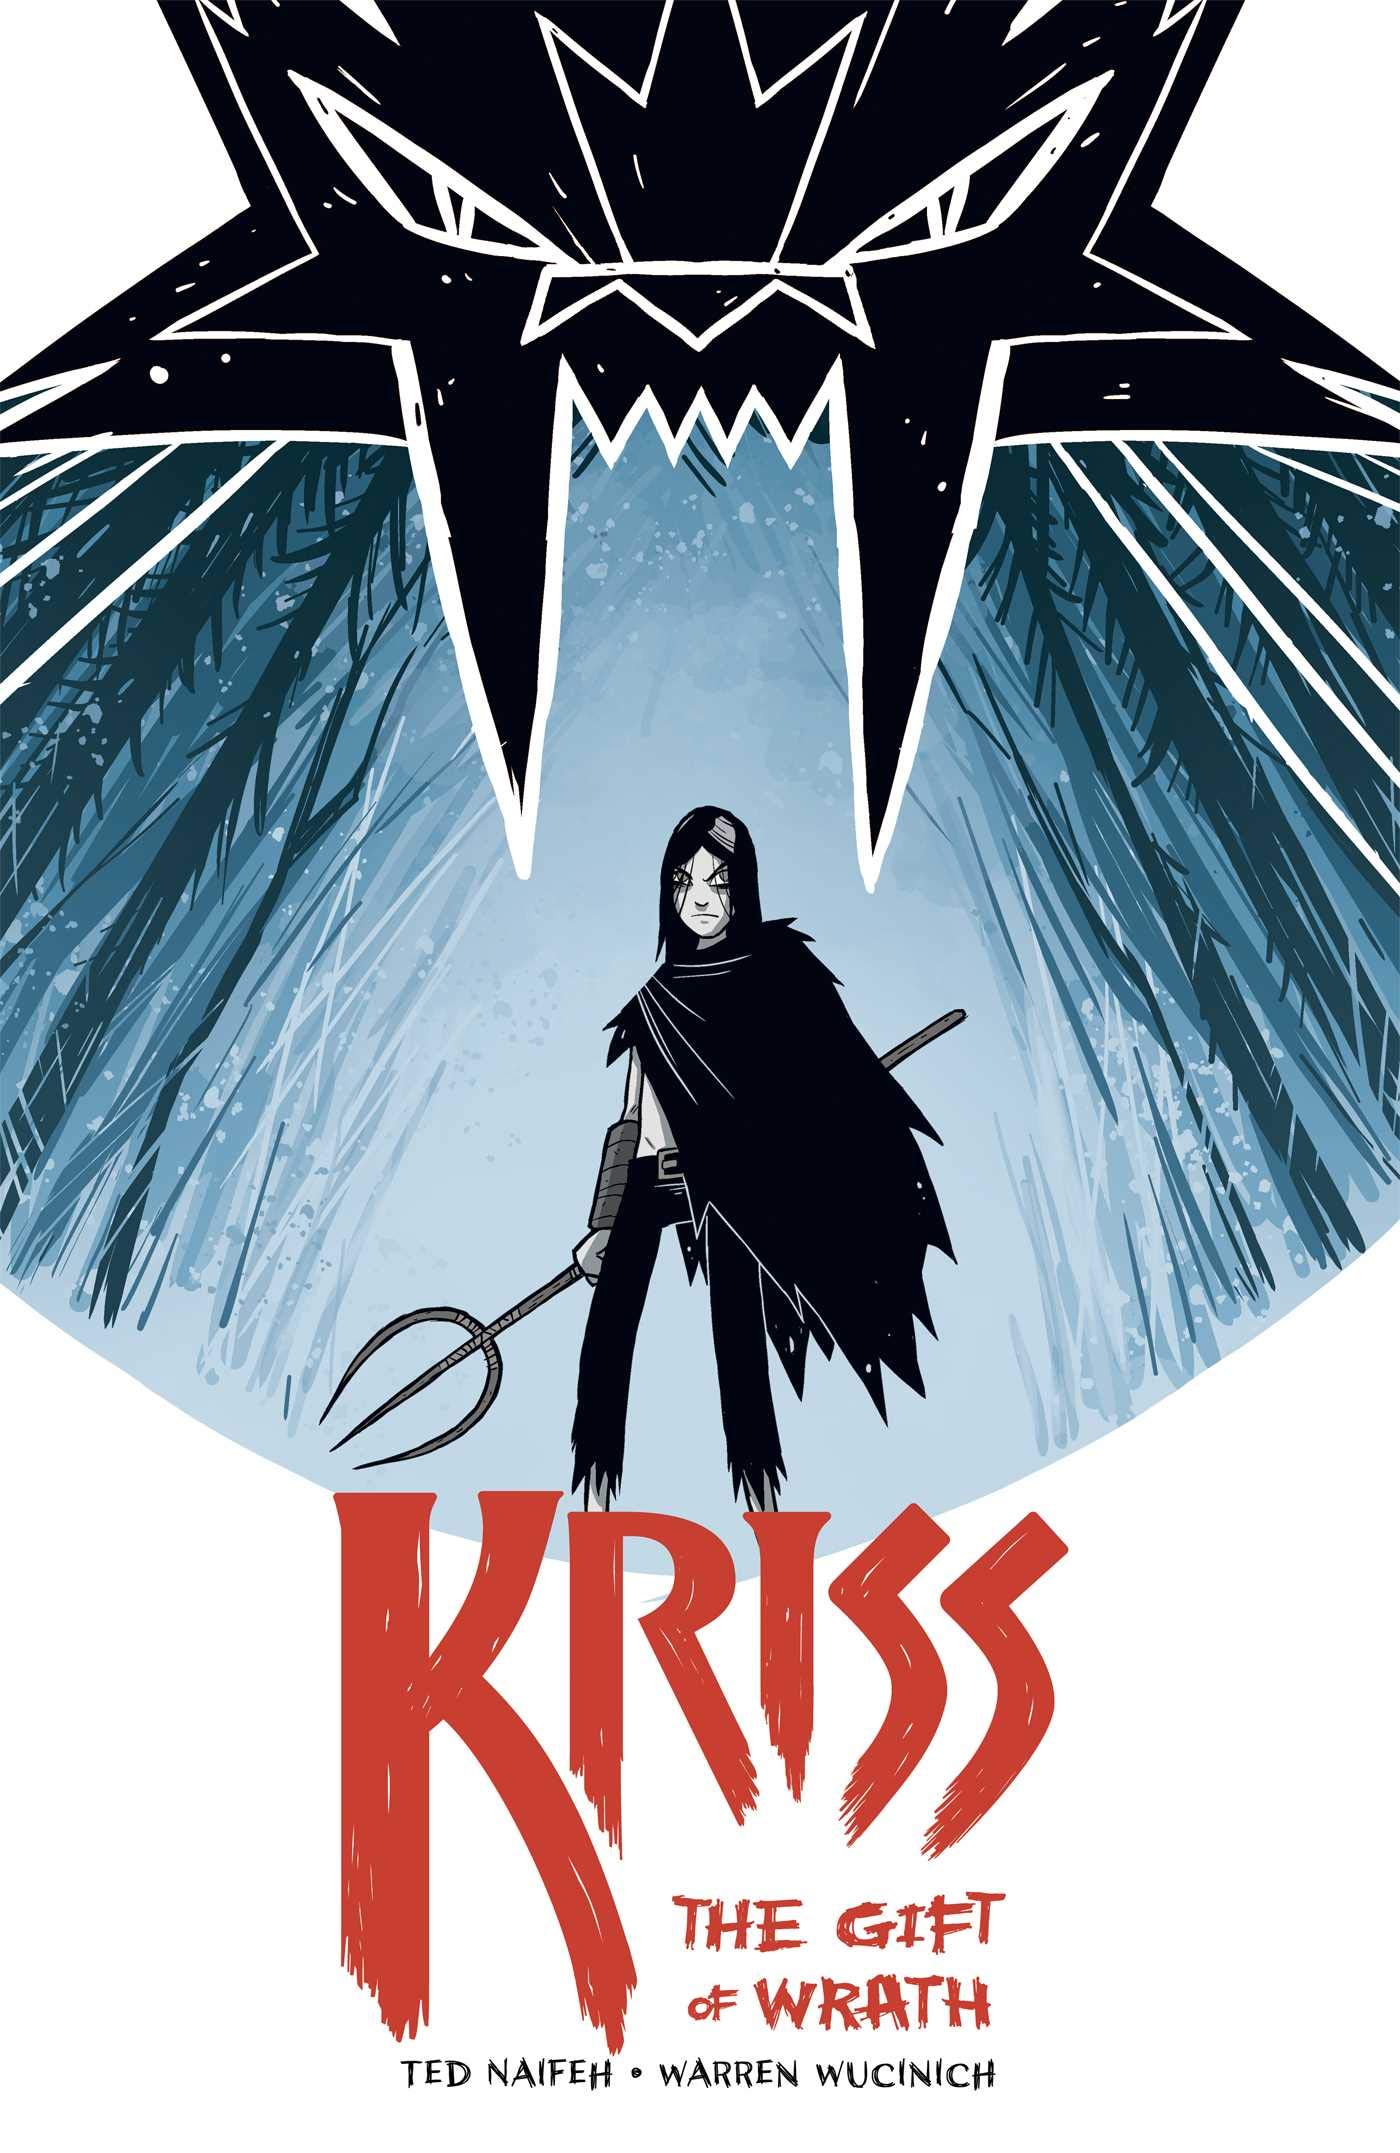 Kriss: The Gift Of Wrath